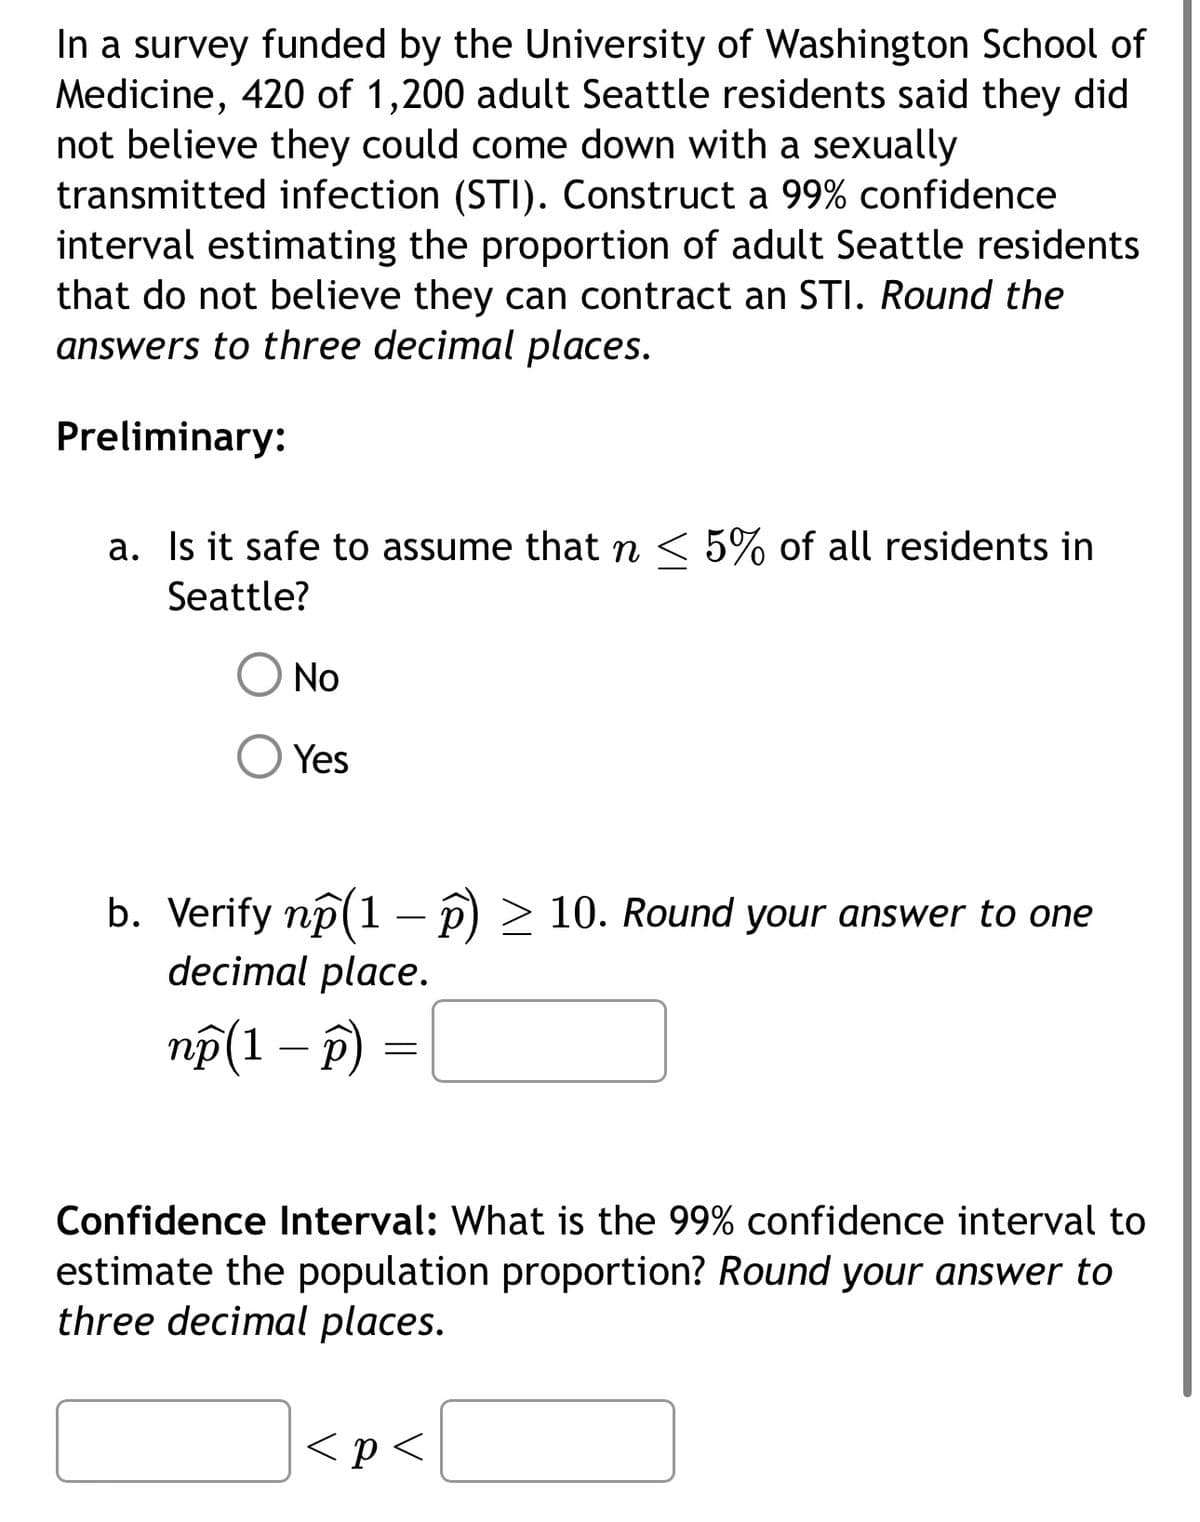 In a survey funded by the University of Washington School of
Medicine, 420 of 1,200 adult Seattle residents said they did
not believe they could come down with a sexually
transmitted infection (STI). Construct a 99% confidence
interval estimating the proportion of adult Seattle residents
that do not believe they can contract an STI. Round the
answers to three decimal places.
Preliminary:
a. Is it safe to assume that n < 5% of all residents in
Seattle?
No
Yes
b. Verify np (1 - p) ≥ 10. Round your answer to one
decimal place.
np(1 - p)
=
Confidence Interval: What is the 99% confidence interval to
estimate the population proportion? Round your answer to
three decimal places.
<p<